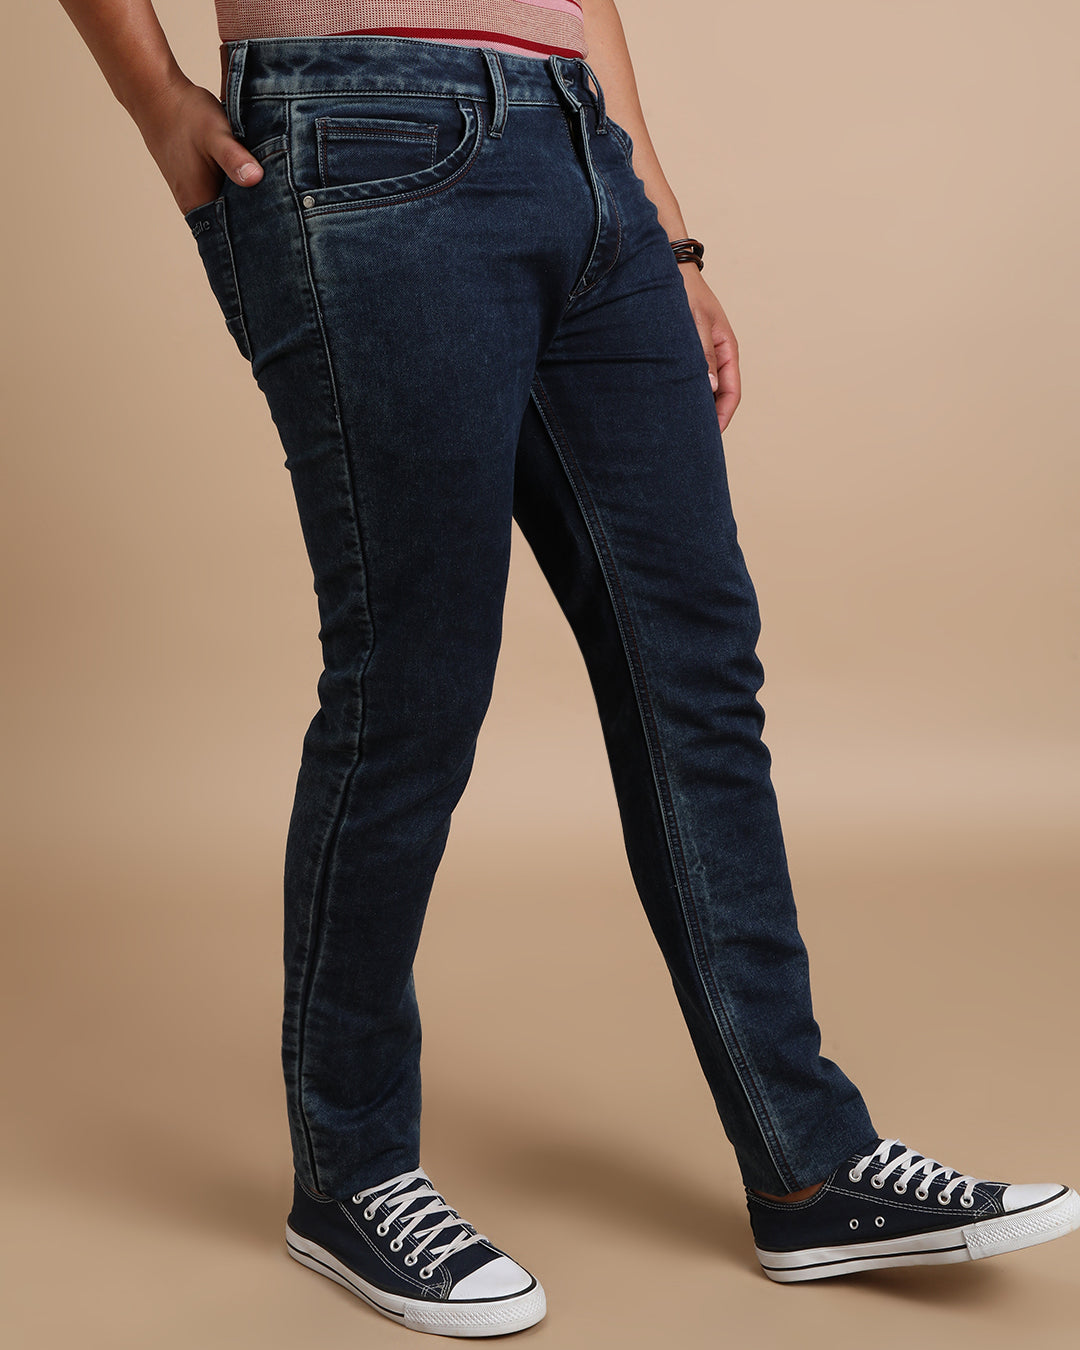 PREMIUM KNITTED DARK WASHED JEANS